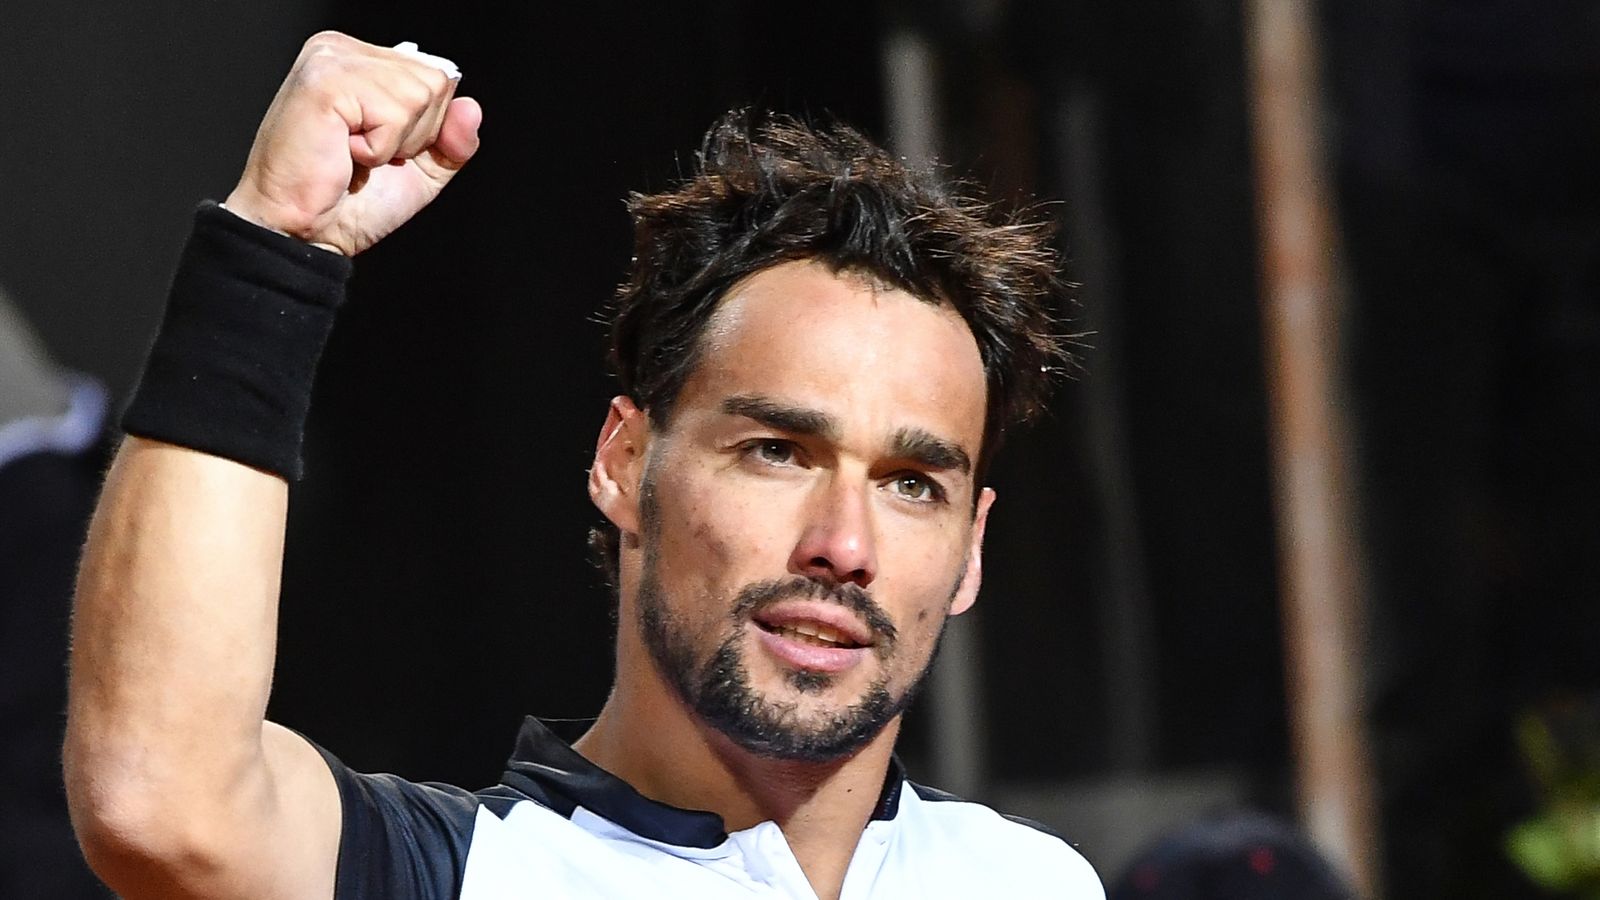 Fabio Fognini will make his debut in the Laver Cup later this year